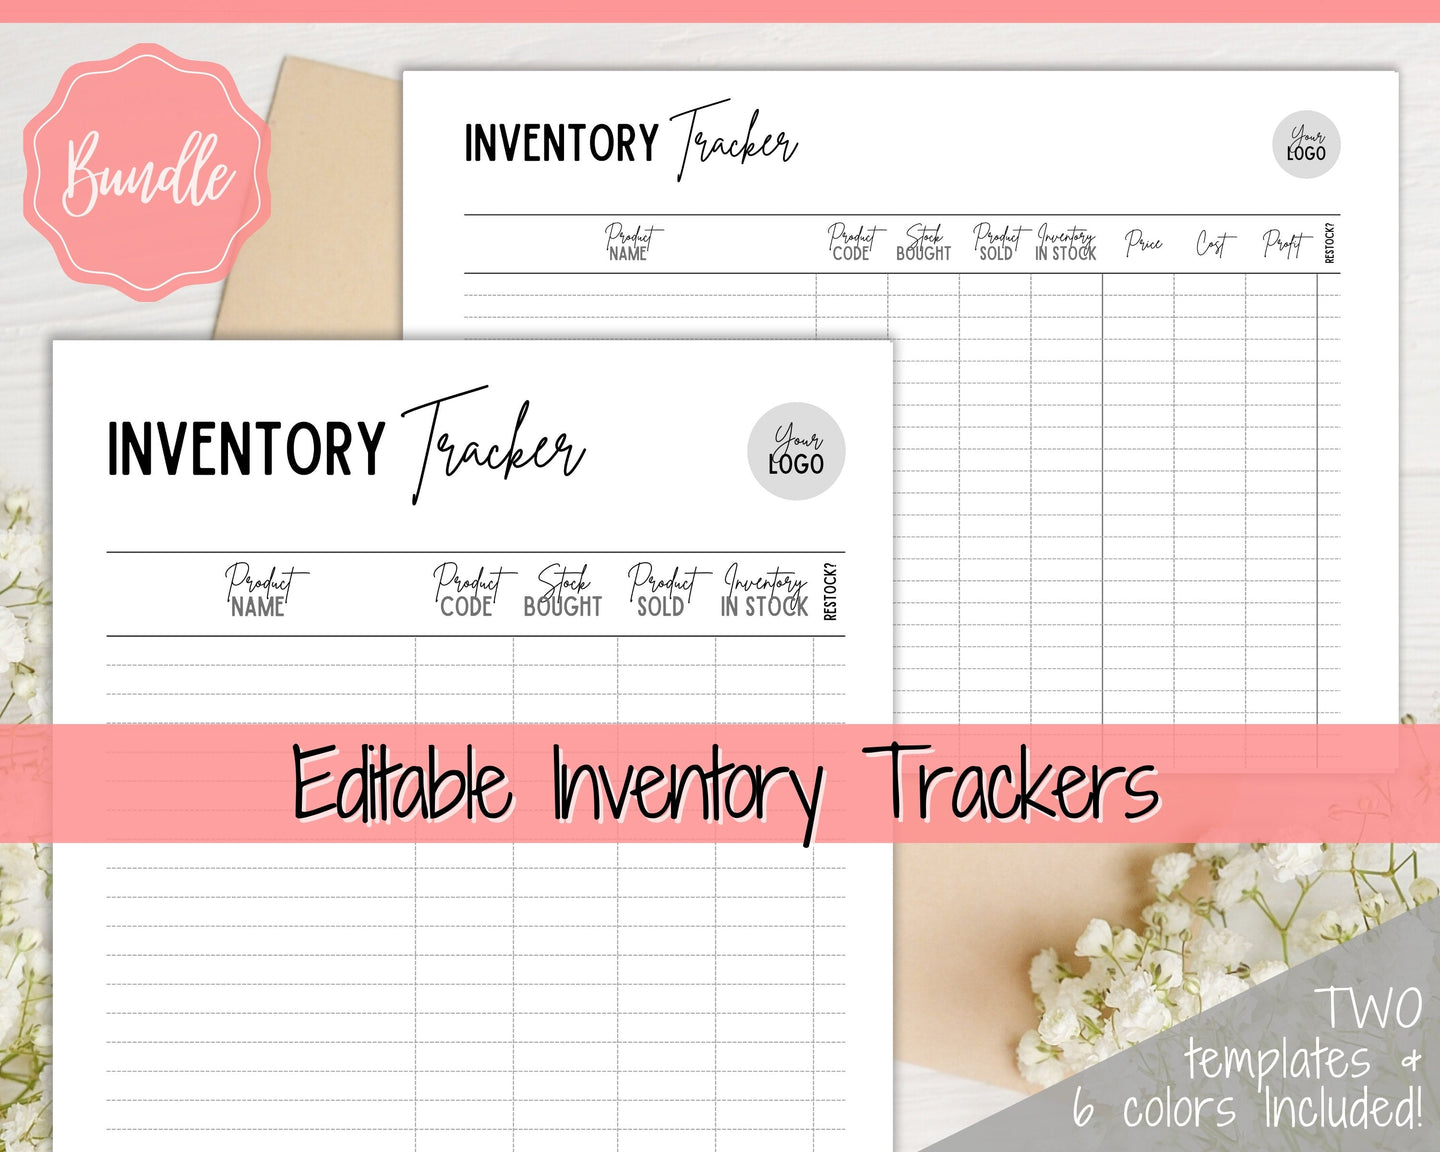 Inventory Tracker, Small Business Inventory Management Form, Product Stock Sales, Etsy Seller, Handmade, Poshmark Reseller Business Template